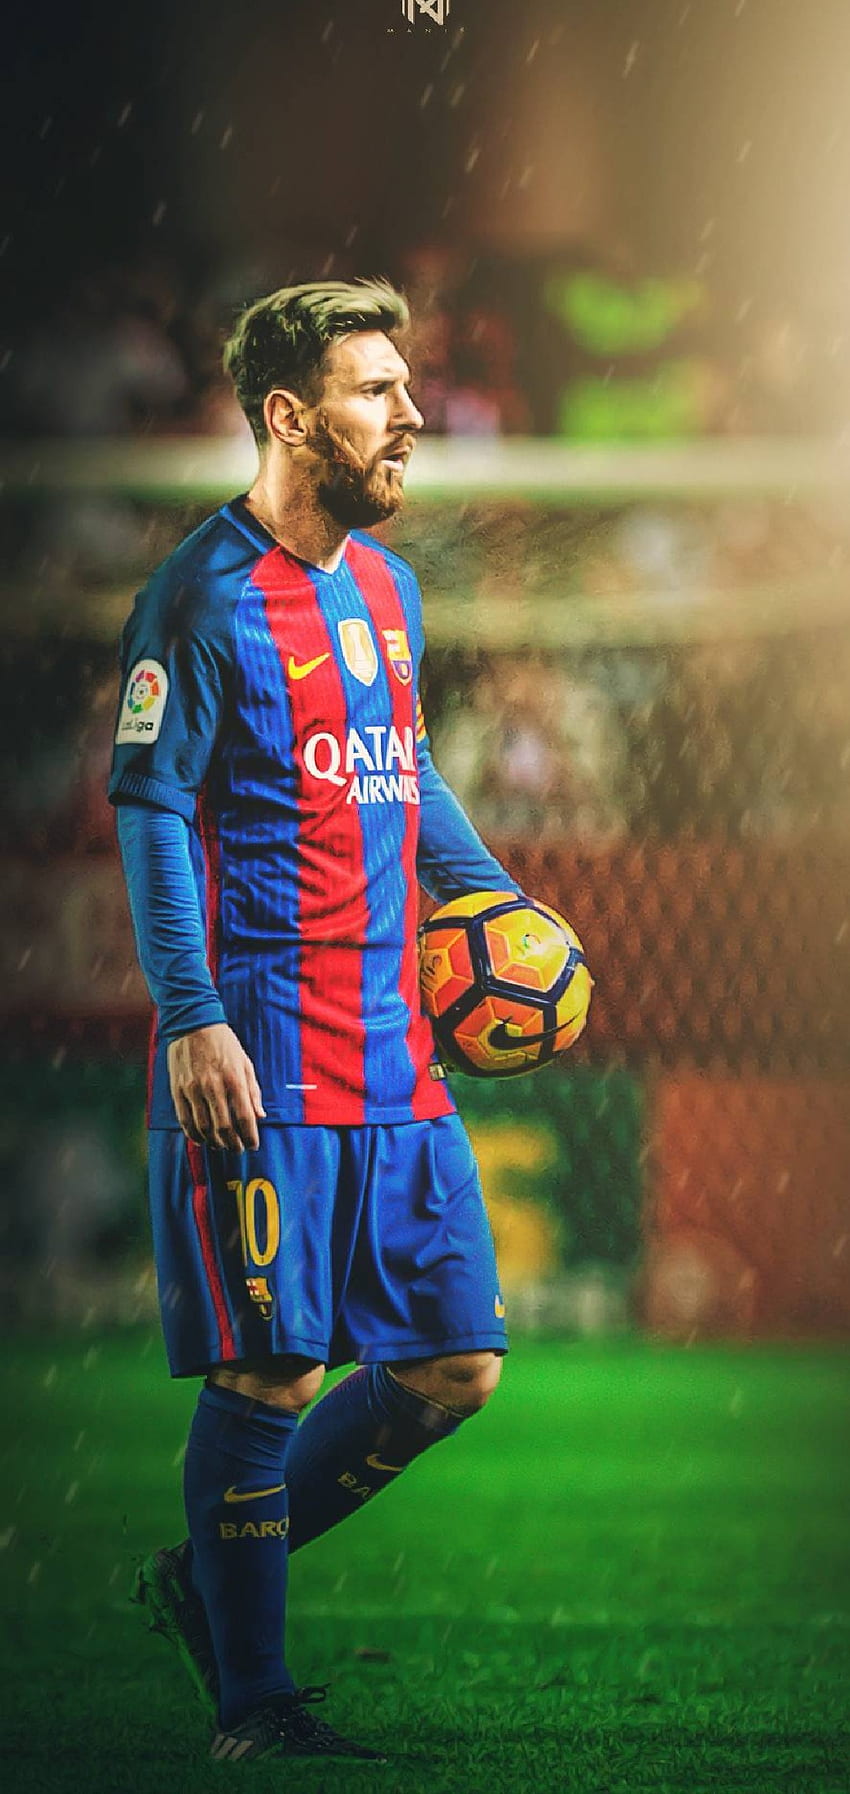 Lionel Messi Phone Wallpaper 20172018 by GraphicSamHD on DeviantArt